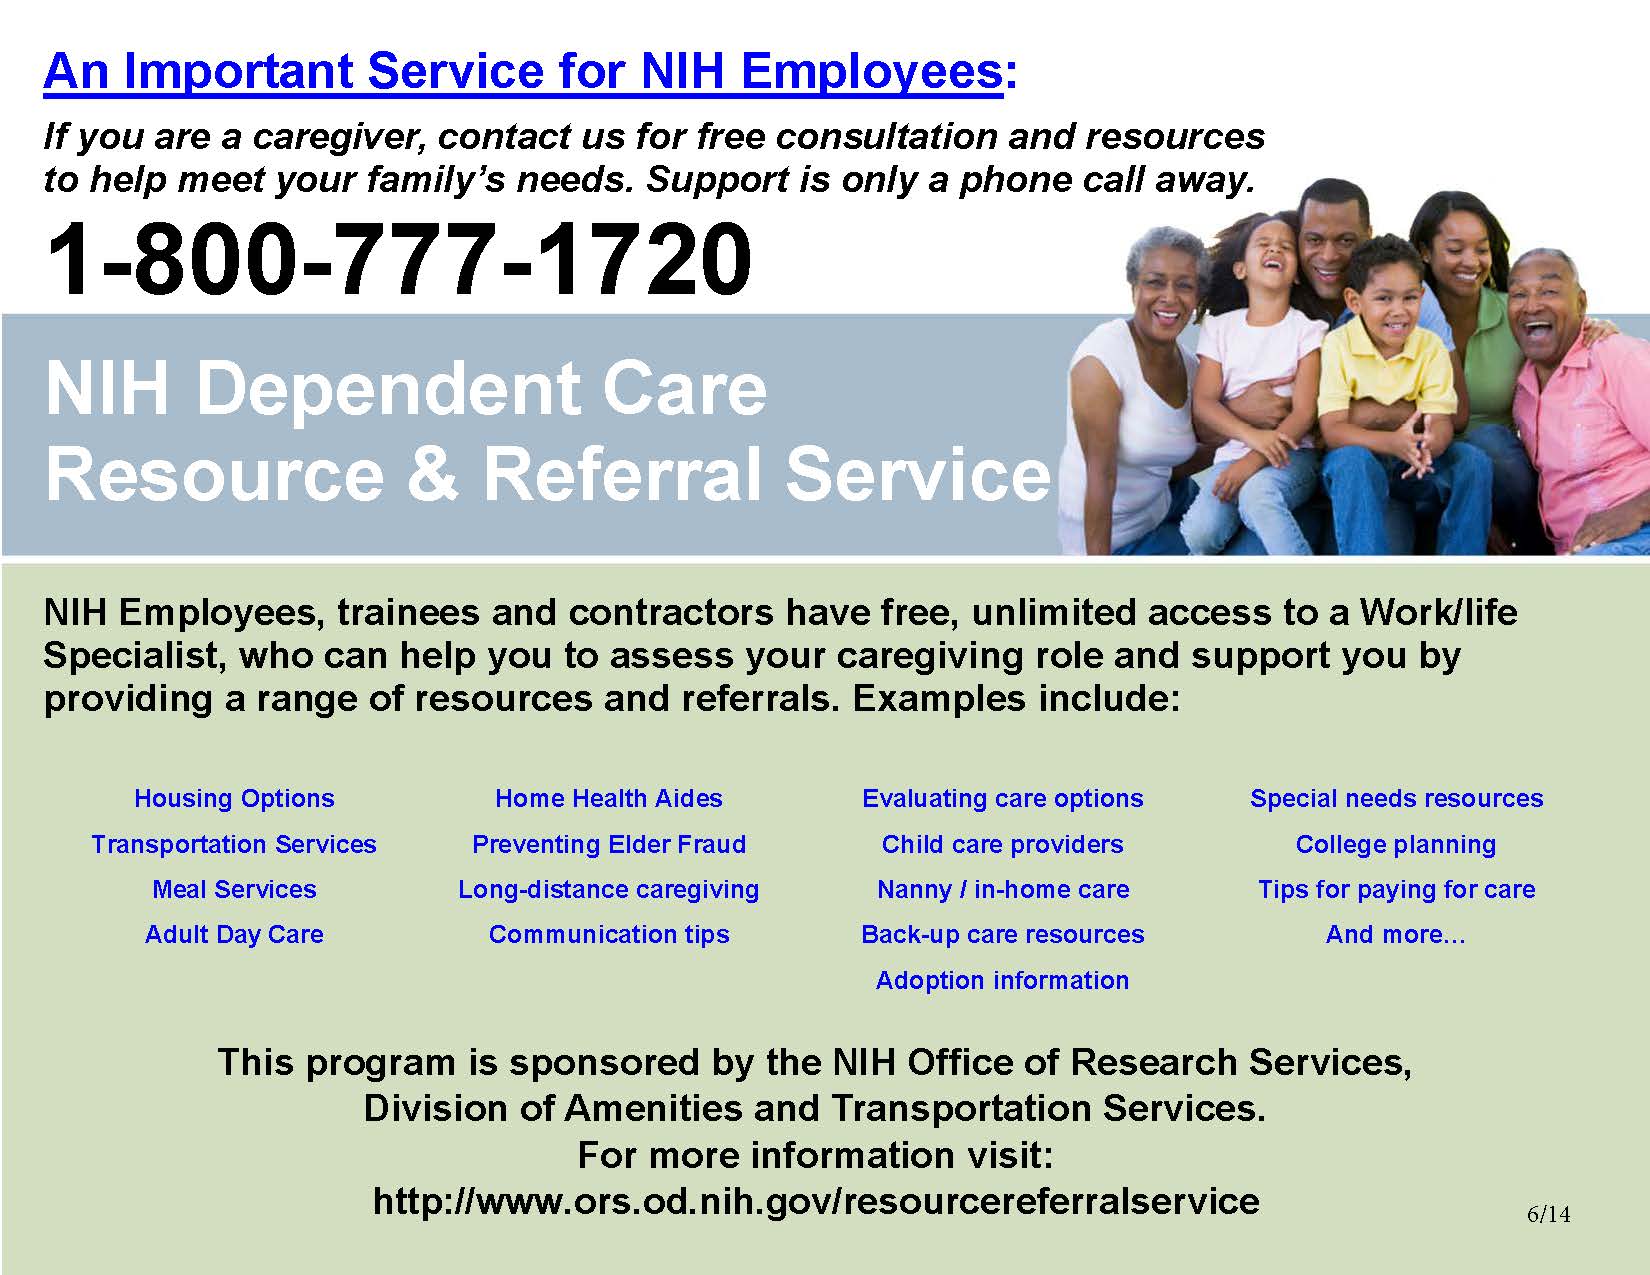 NIH Dependent Care Resource & Referral